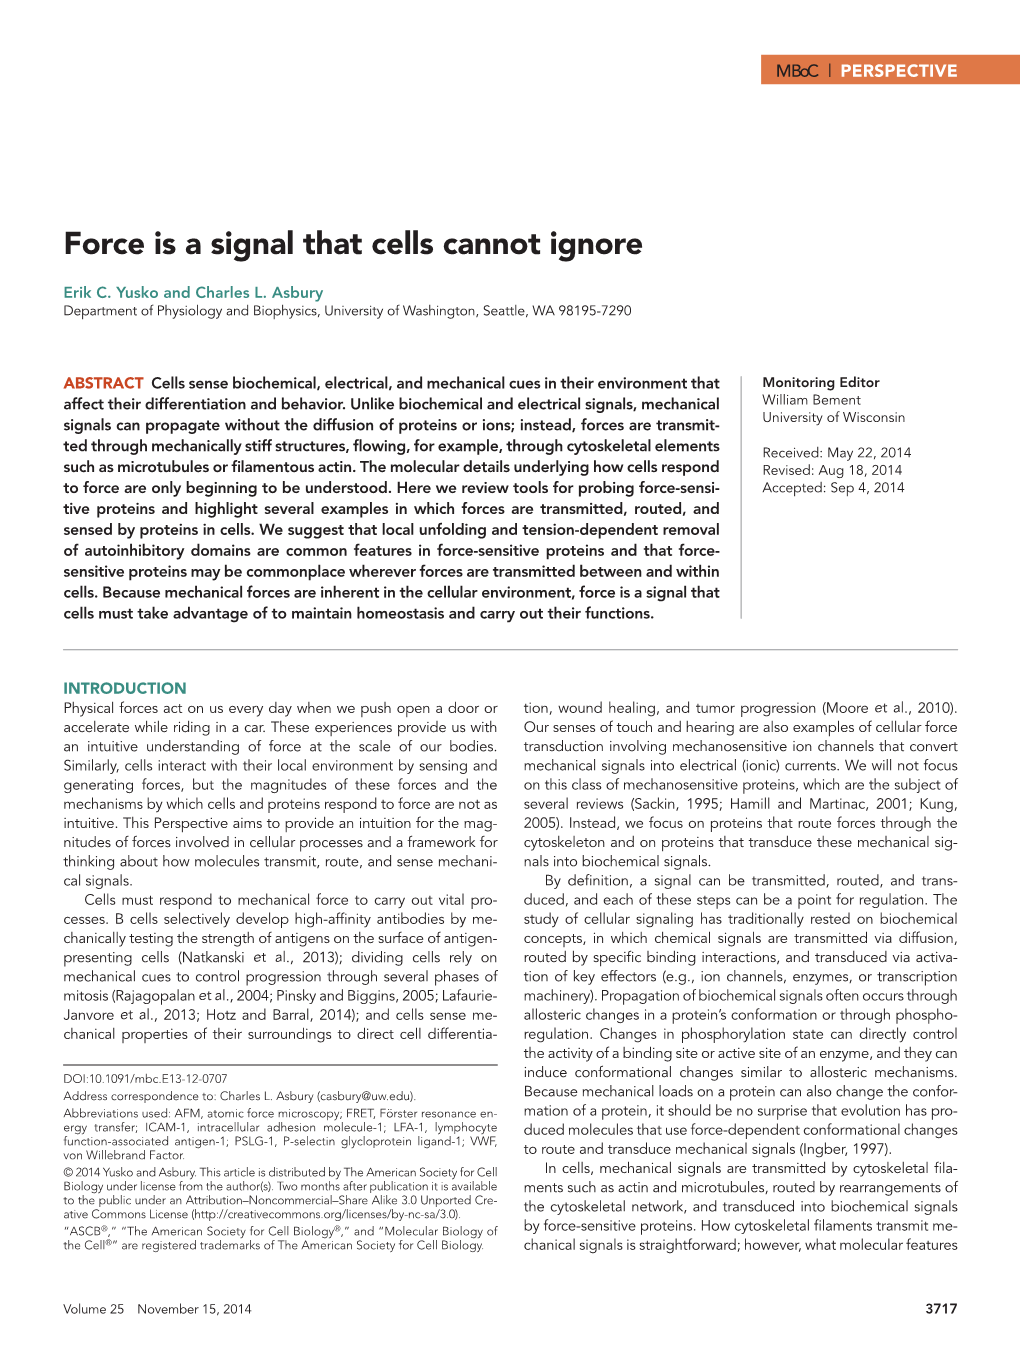 Force Is a Signal That Cells Cannot Ignore